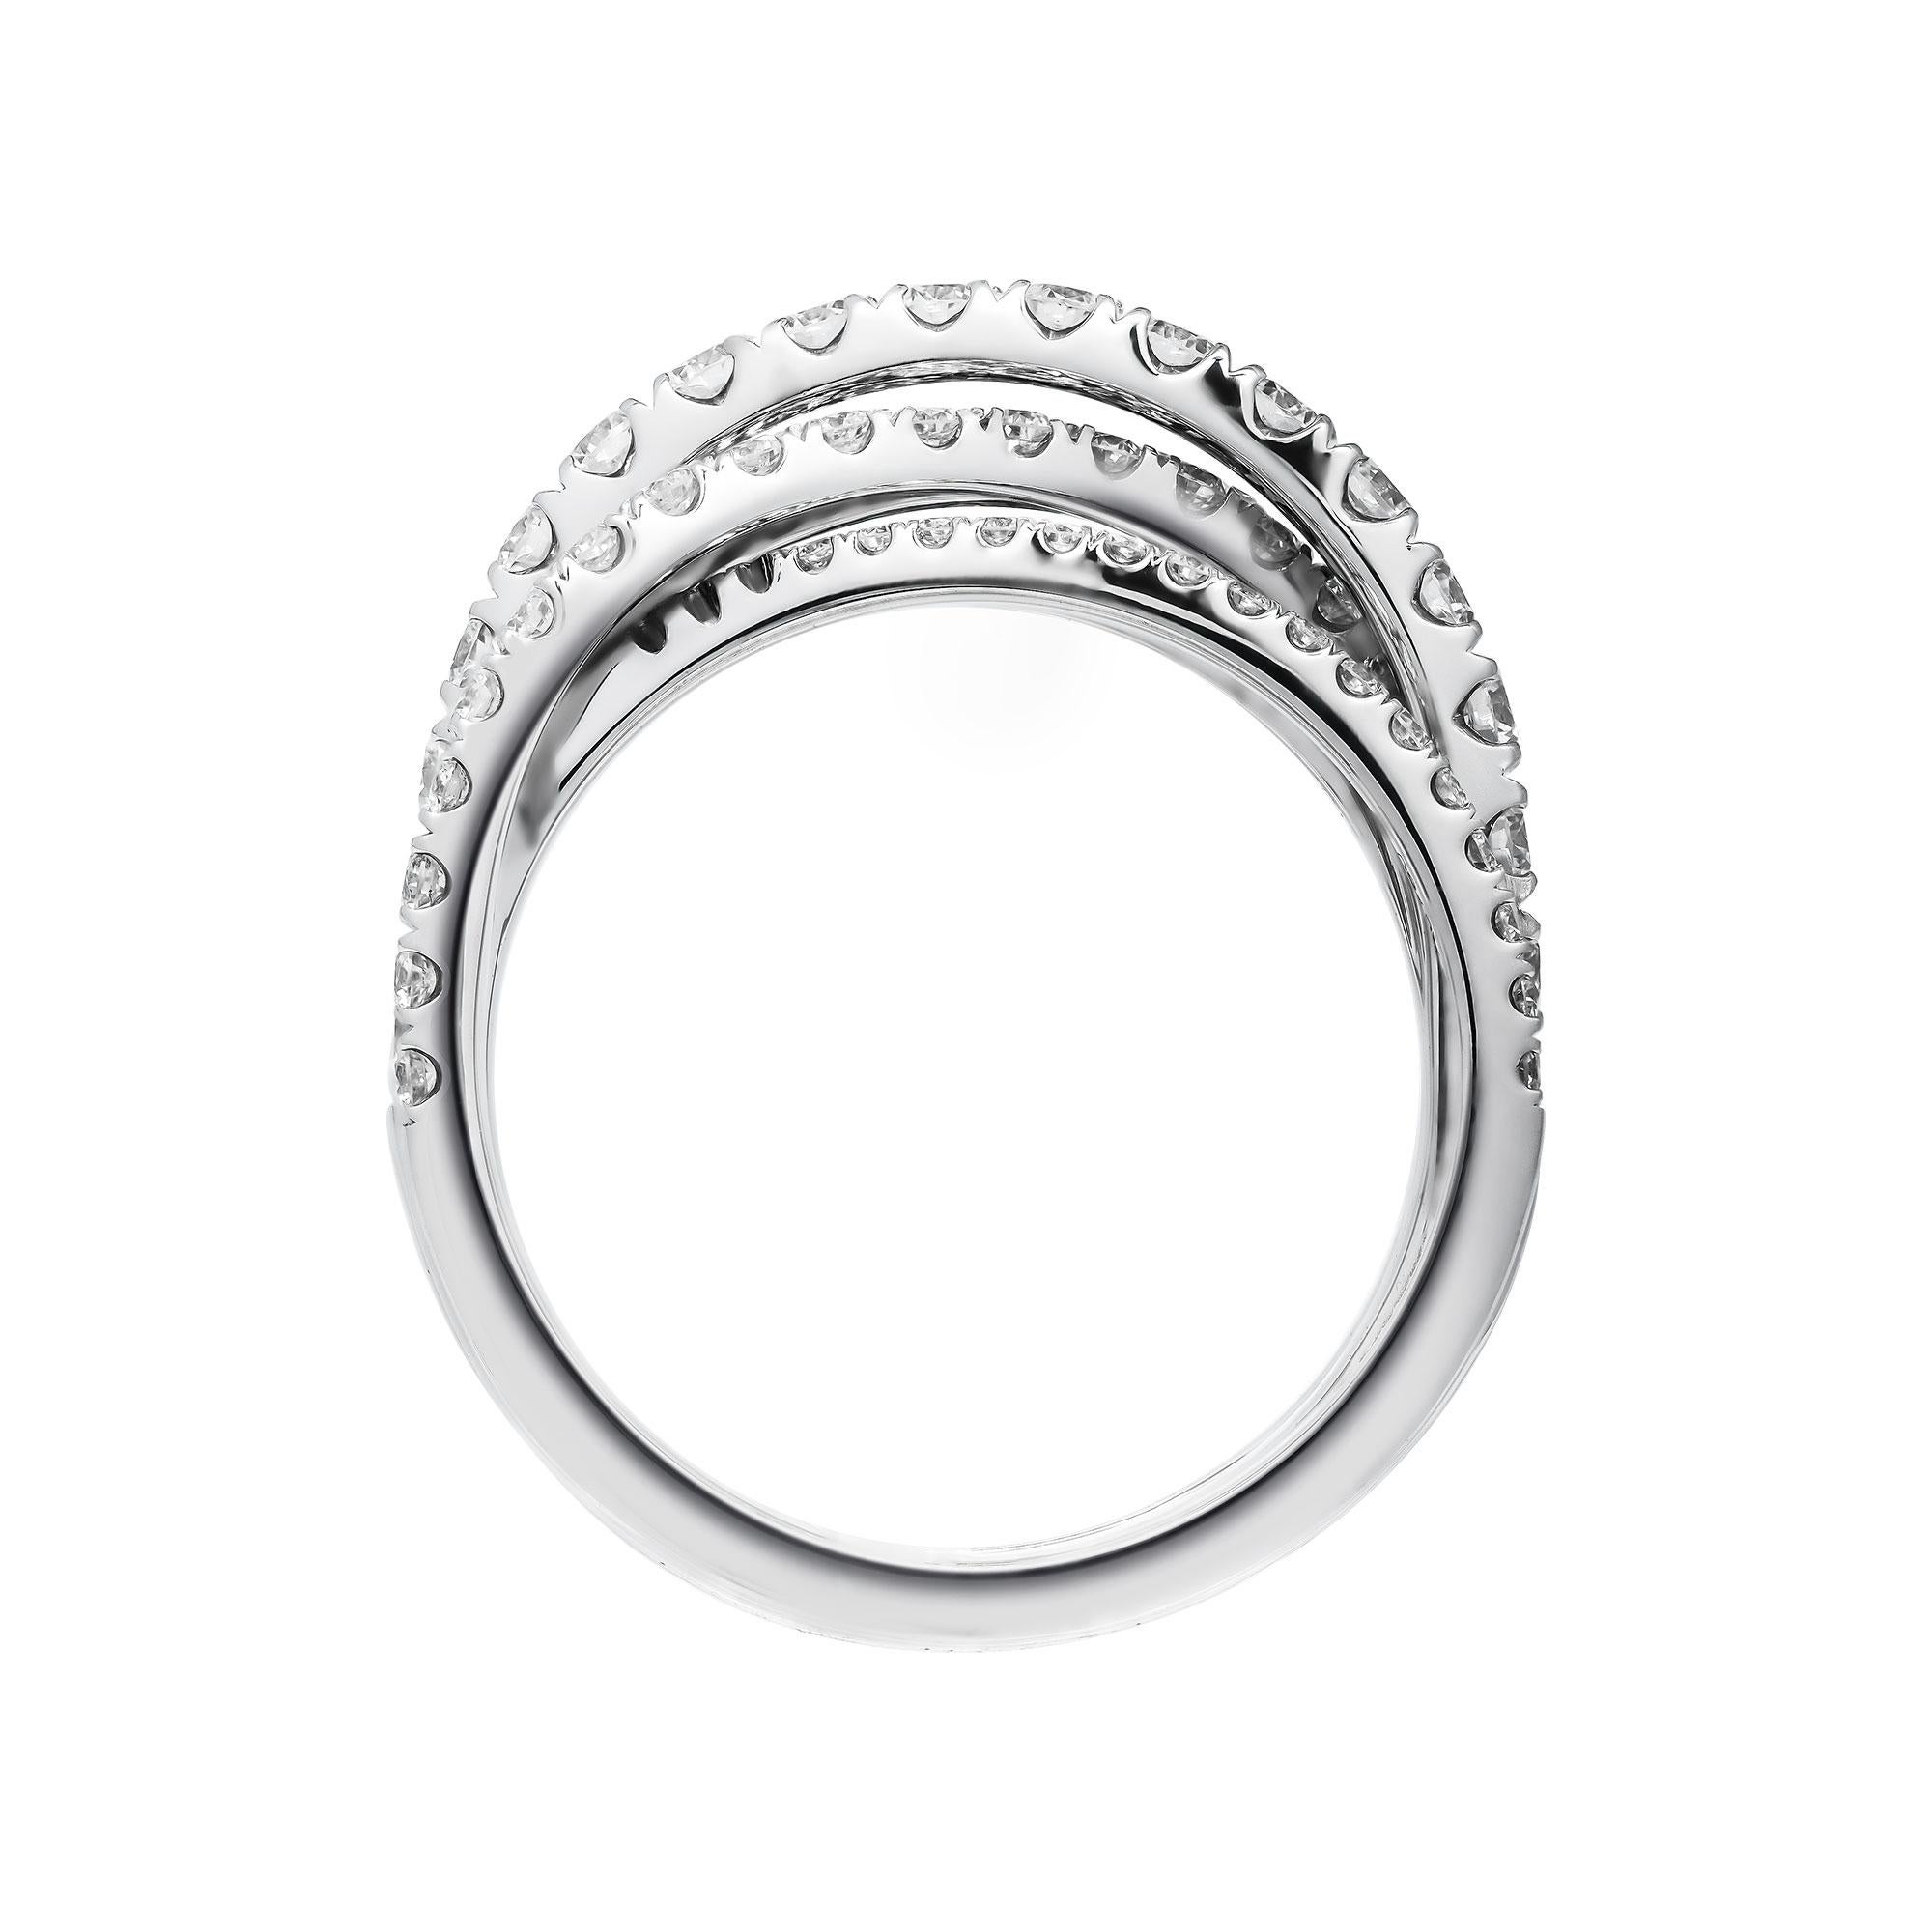 Gorgeous Diamond Cocktail Ring, Timeless Piece!
Delivers exceptional high end luxurious look
Featuring 4 rows of pave diamonds that overlapping each other, truly unique design, set with 88 brilliant-cut diamonds E-F color, VVS clarity totaling 1.56